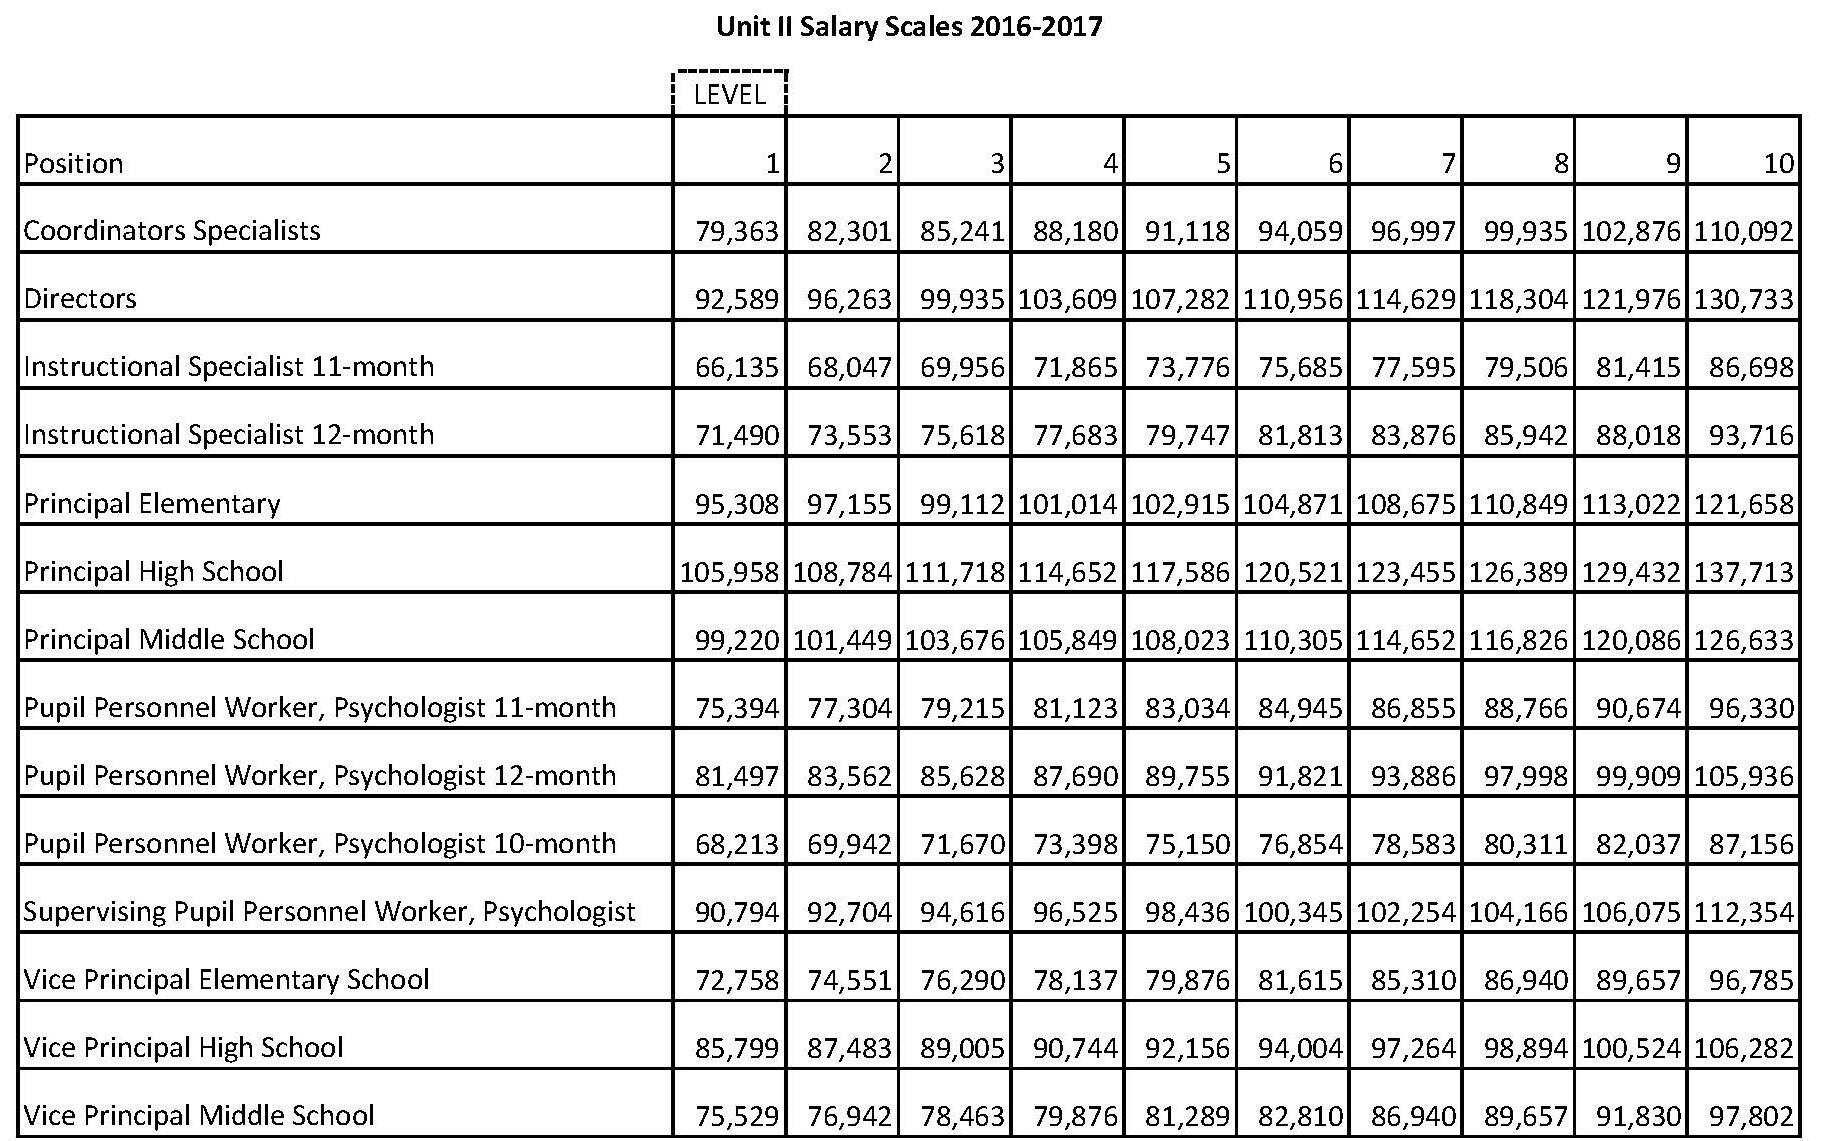 CCPS Salary Scale for Unit I & Unit II - Education Association of